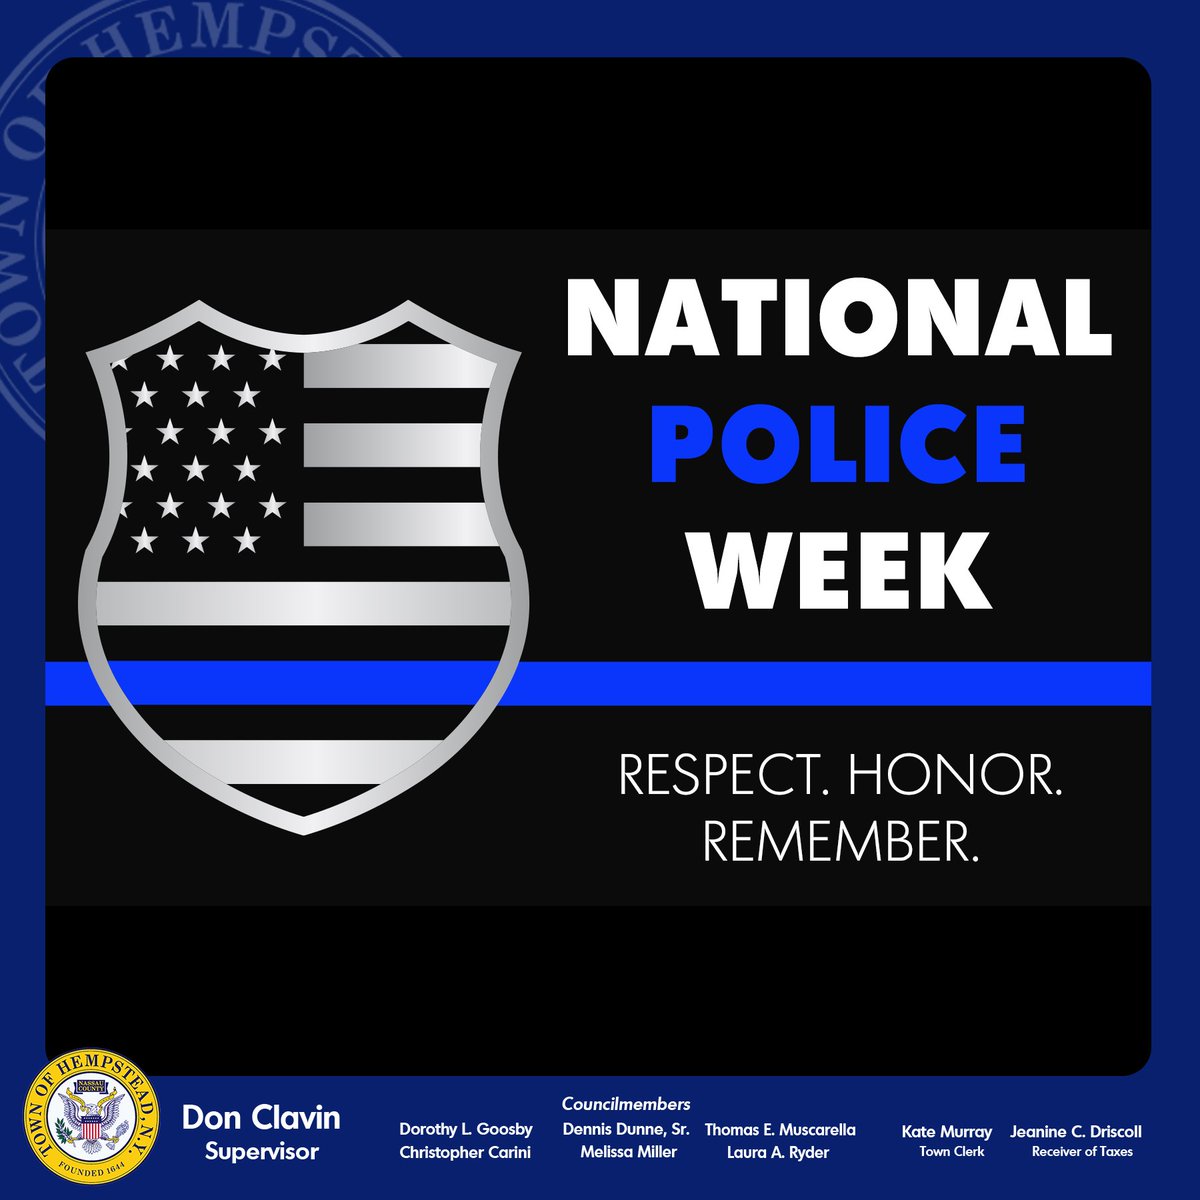 I want to express my deepest gratitude to our devoted law enforcement officers during National Police Week. On behalf of all of us here in America's largest township, thank you for your bravery, sacrifice, and selfless dedication to keeping us safe. #NationalPoliceWeek